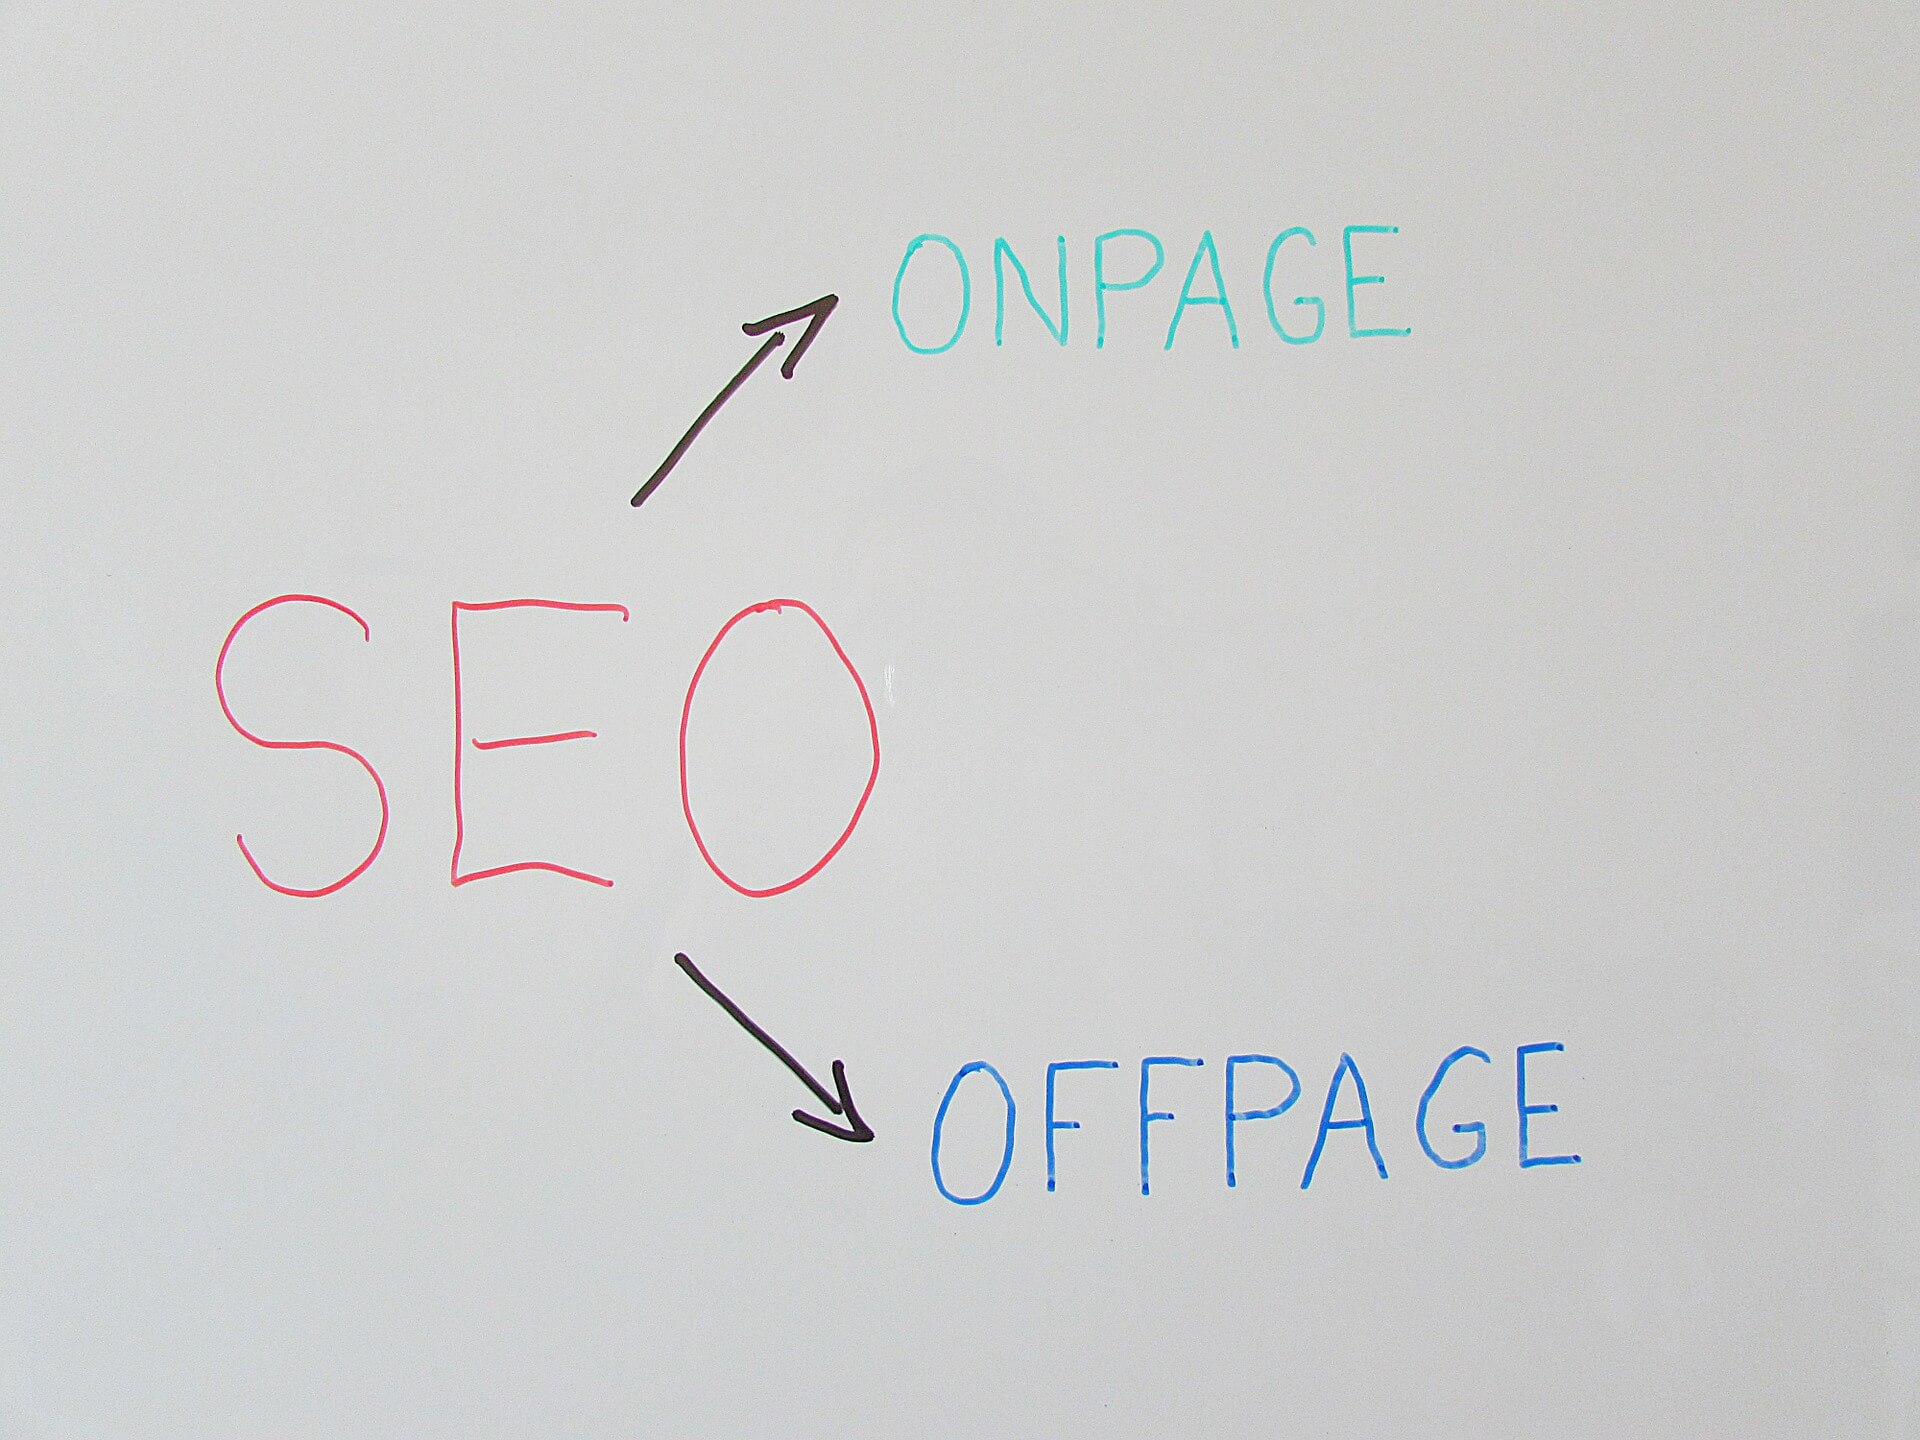 on page seo off page seo